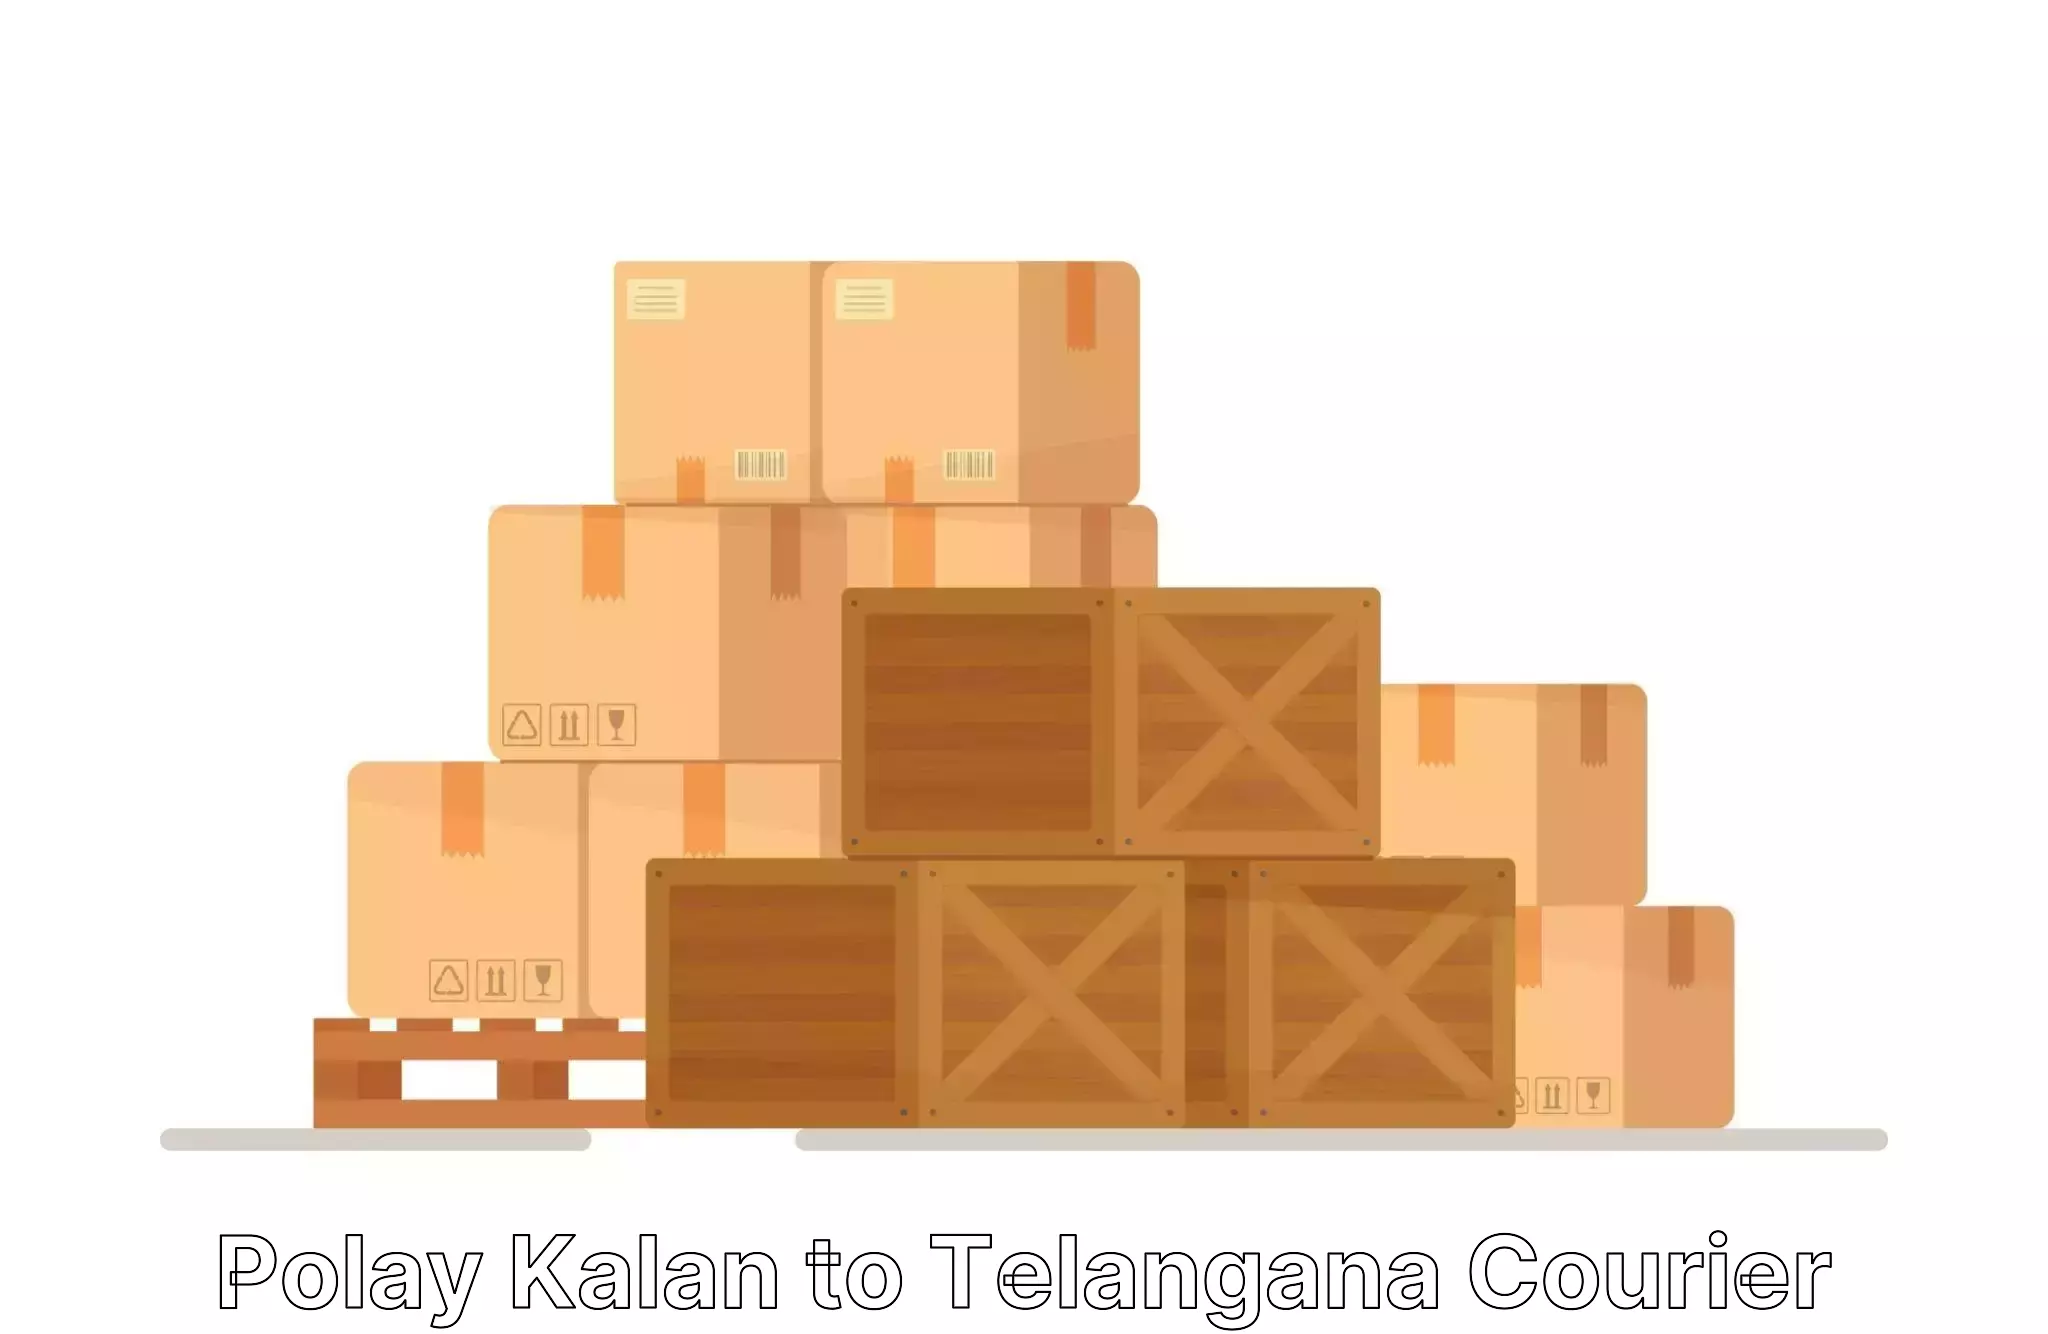 Hassle-free relocation Polay Kalan to Amangal